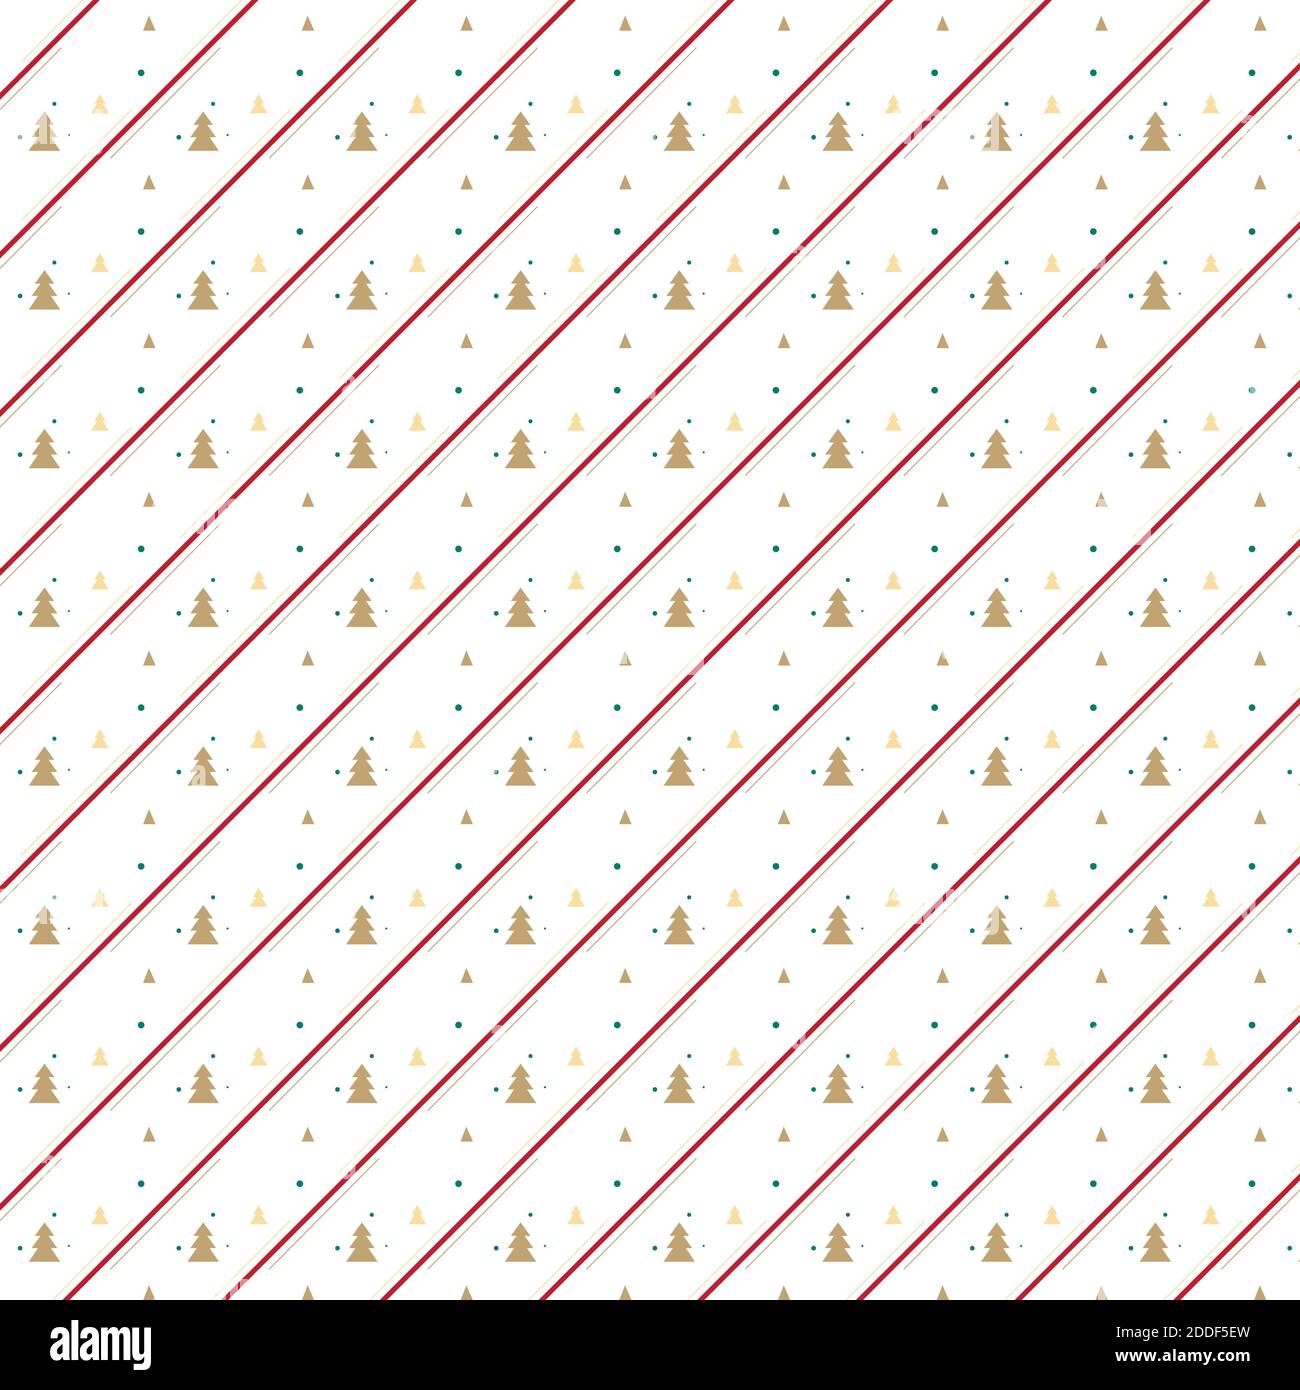 Golden Christmas tree and red line seamless pattern on white background for gift wrapping paper Stock Vector